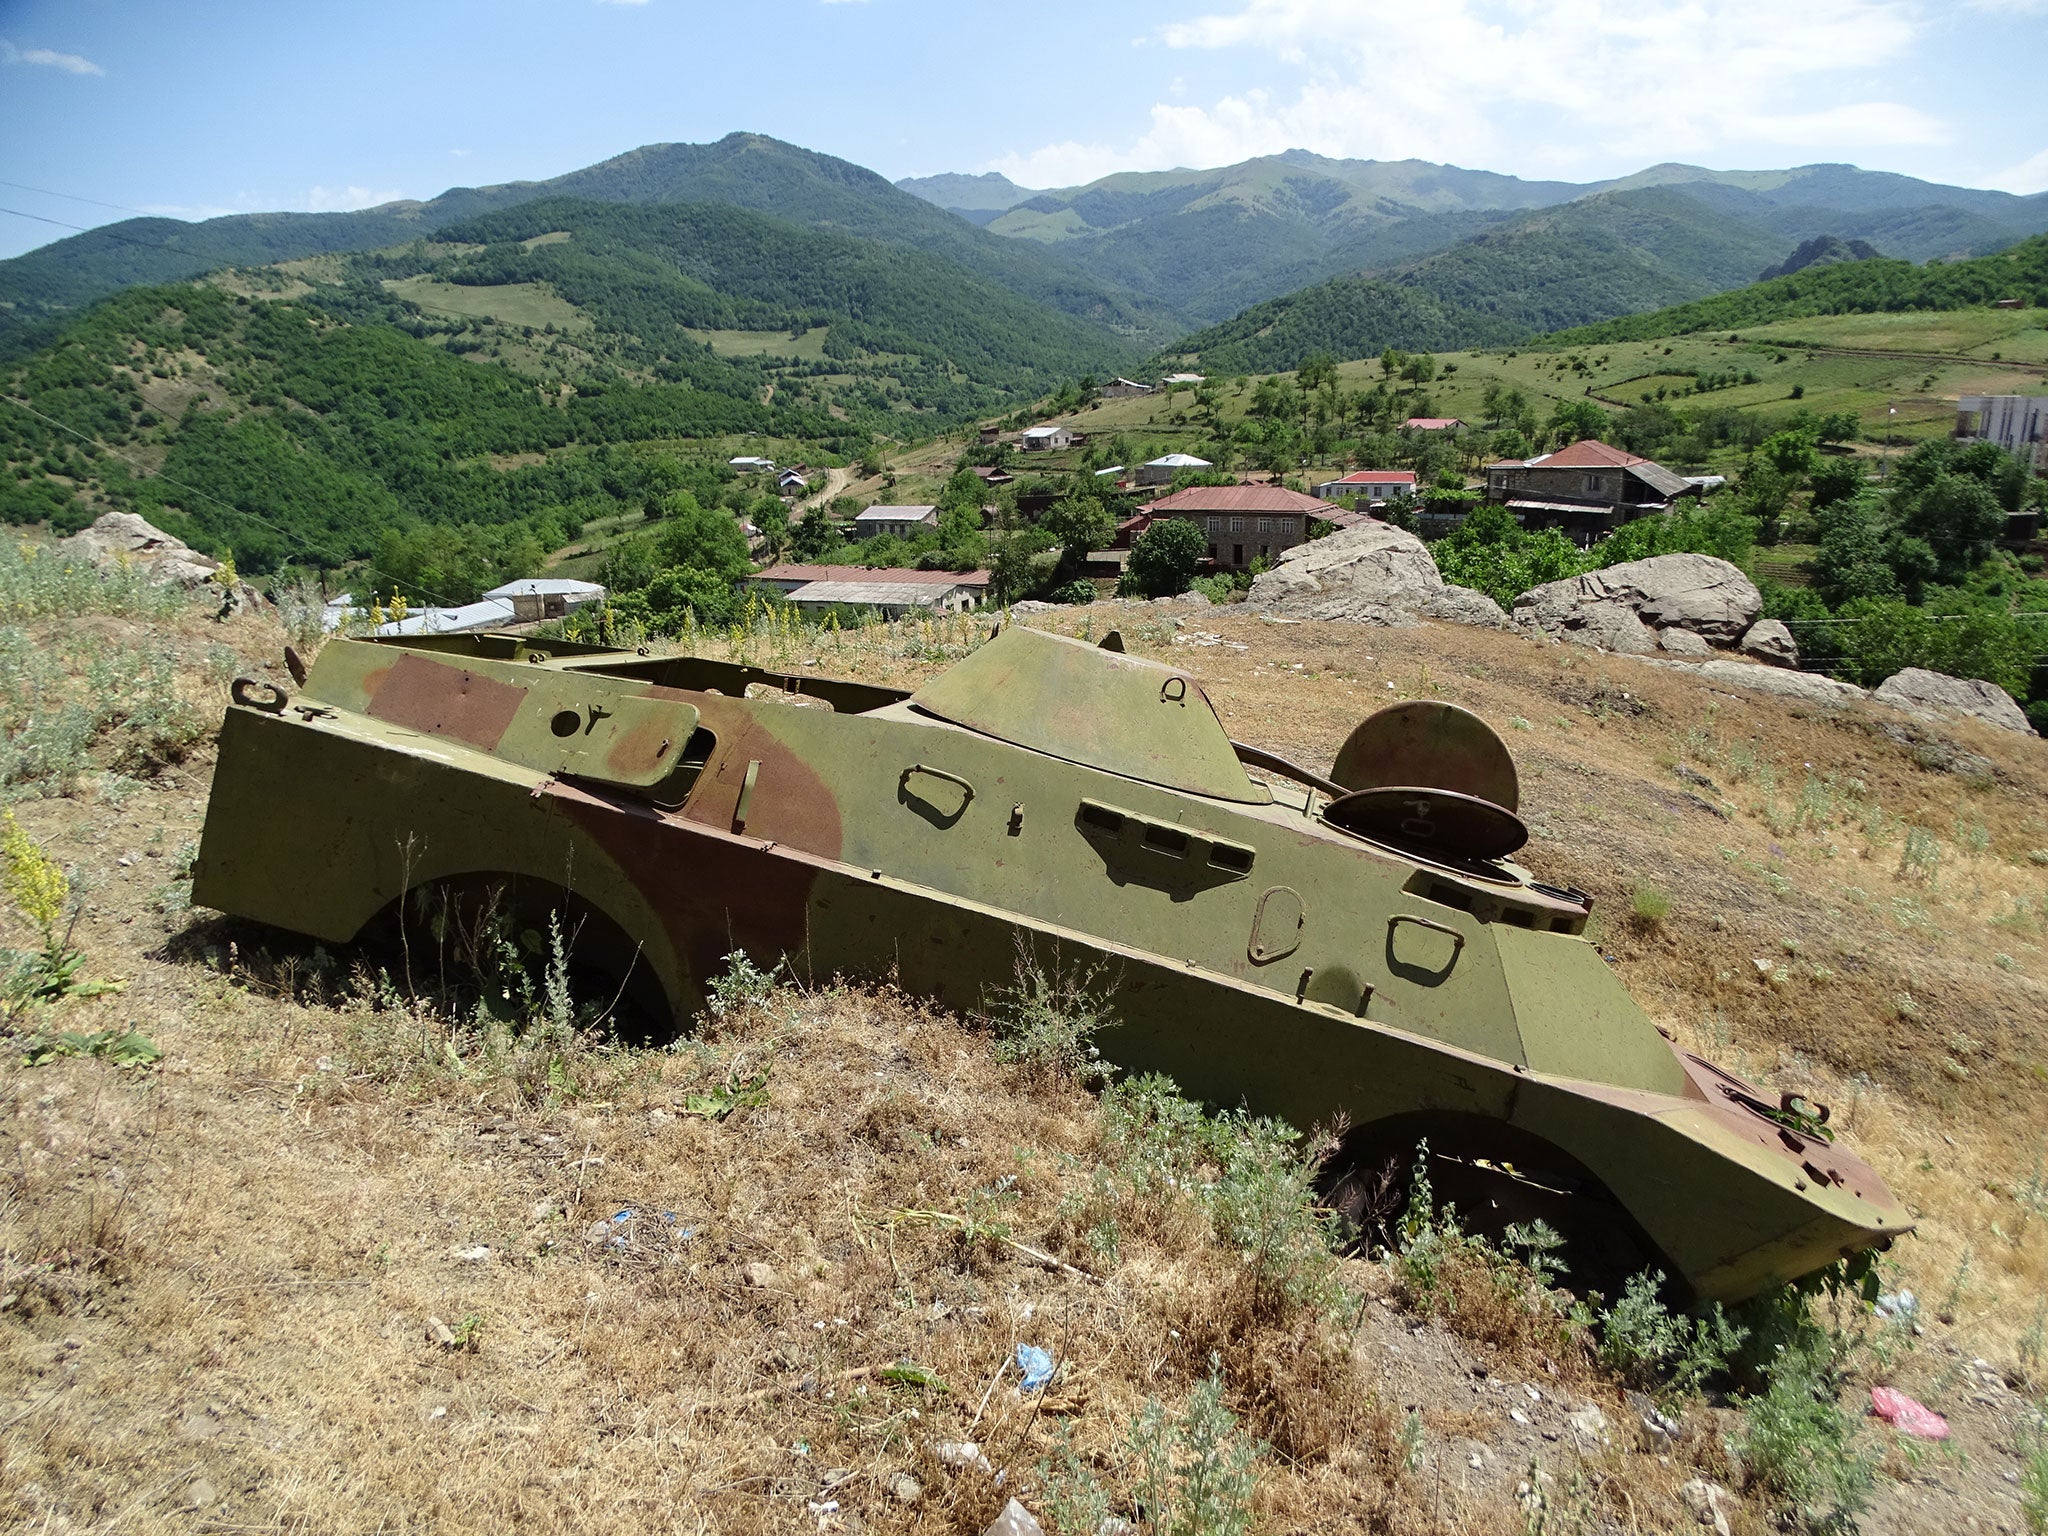 A destroyed BDRM in Nagorno-Karabakh, a mountainous area officially part of Azerbaijan which has been under the control of the Armenian separatists since 1994